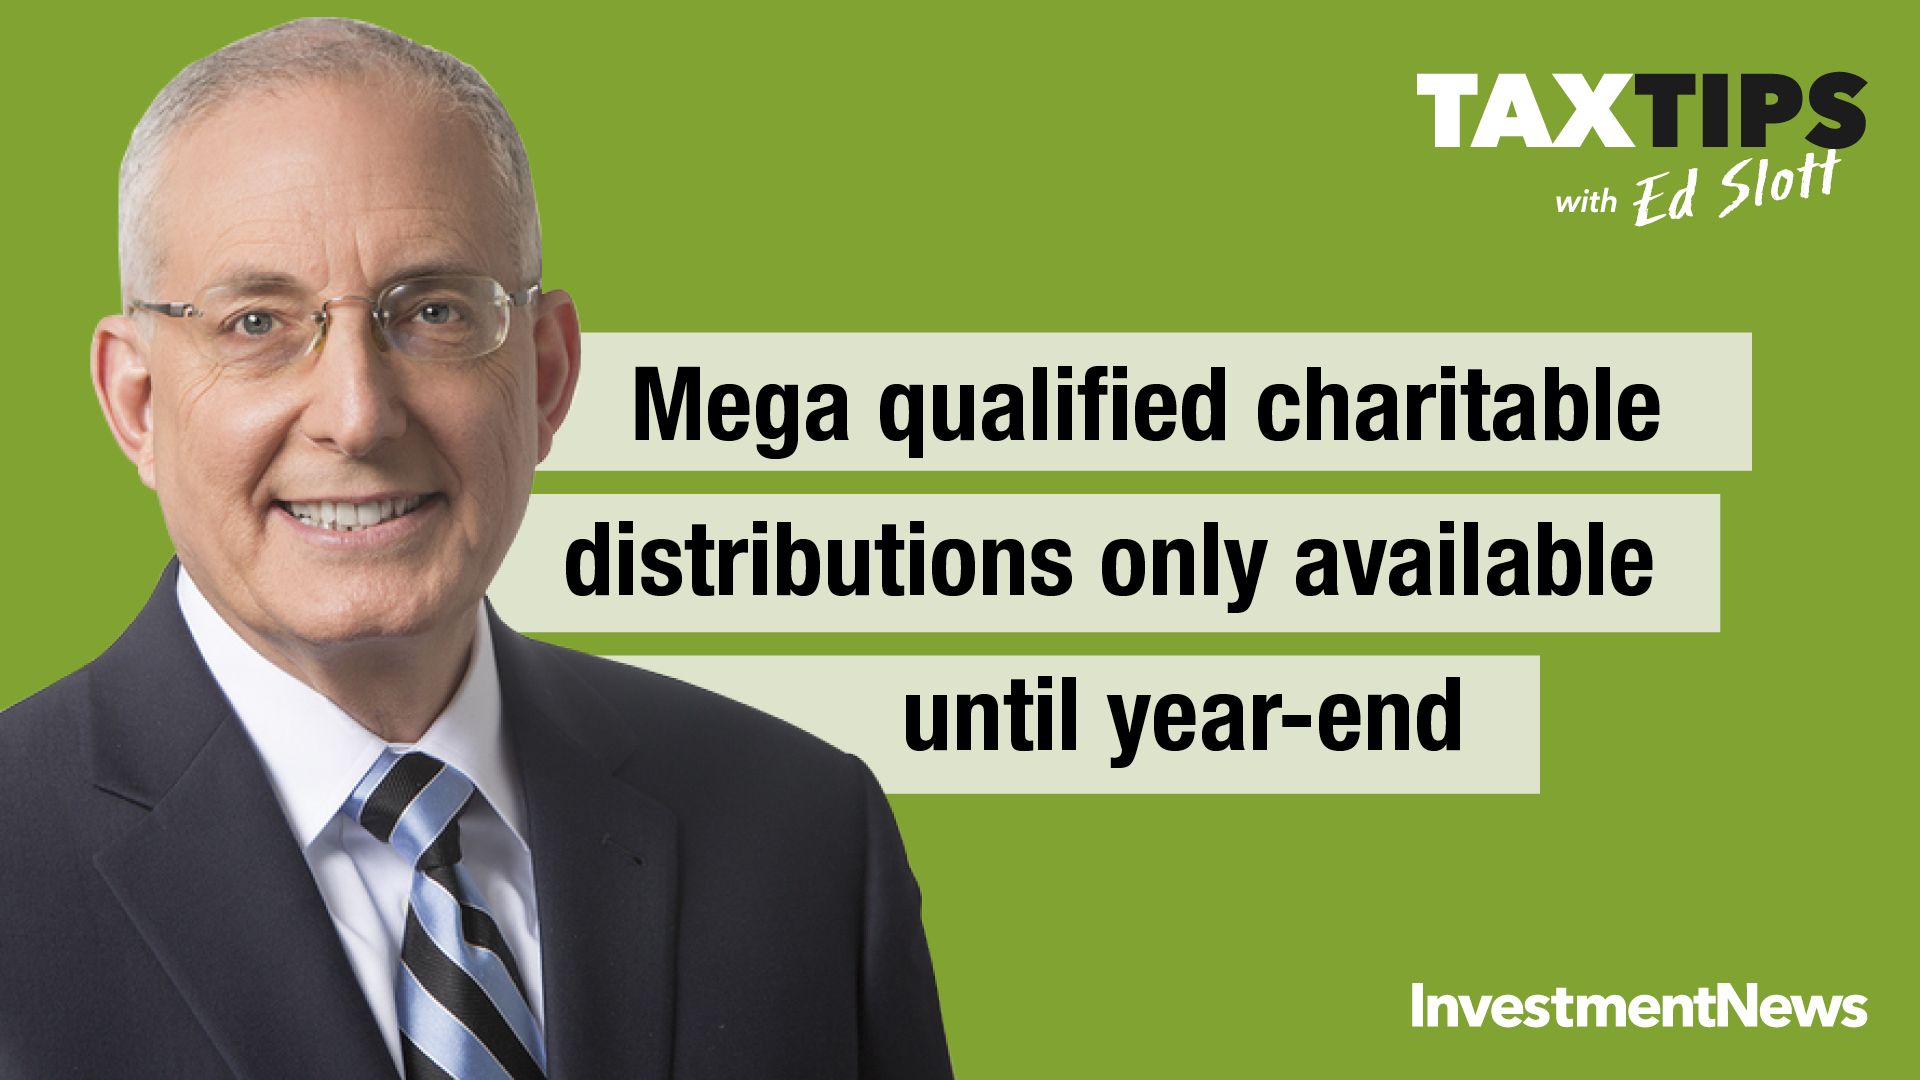 Mega qualified charitable distributions only available until year-end